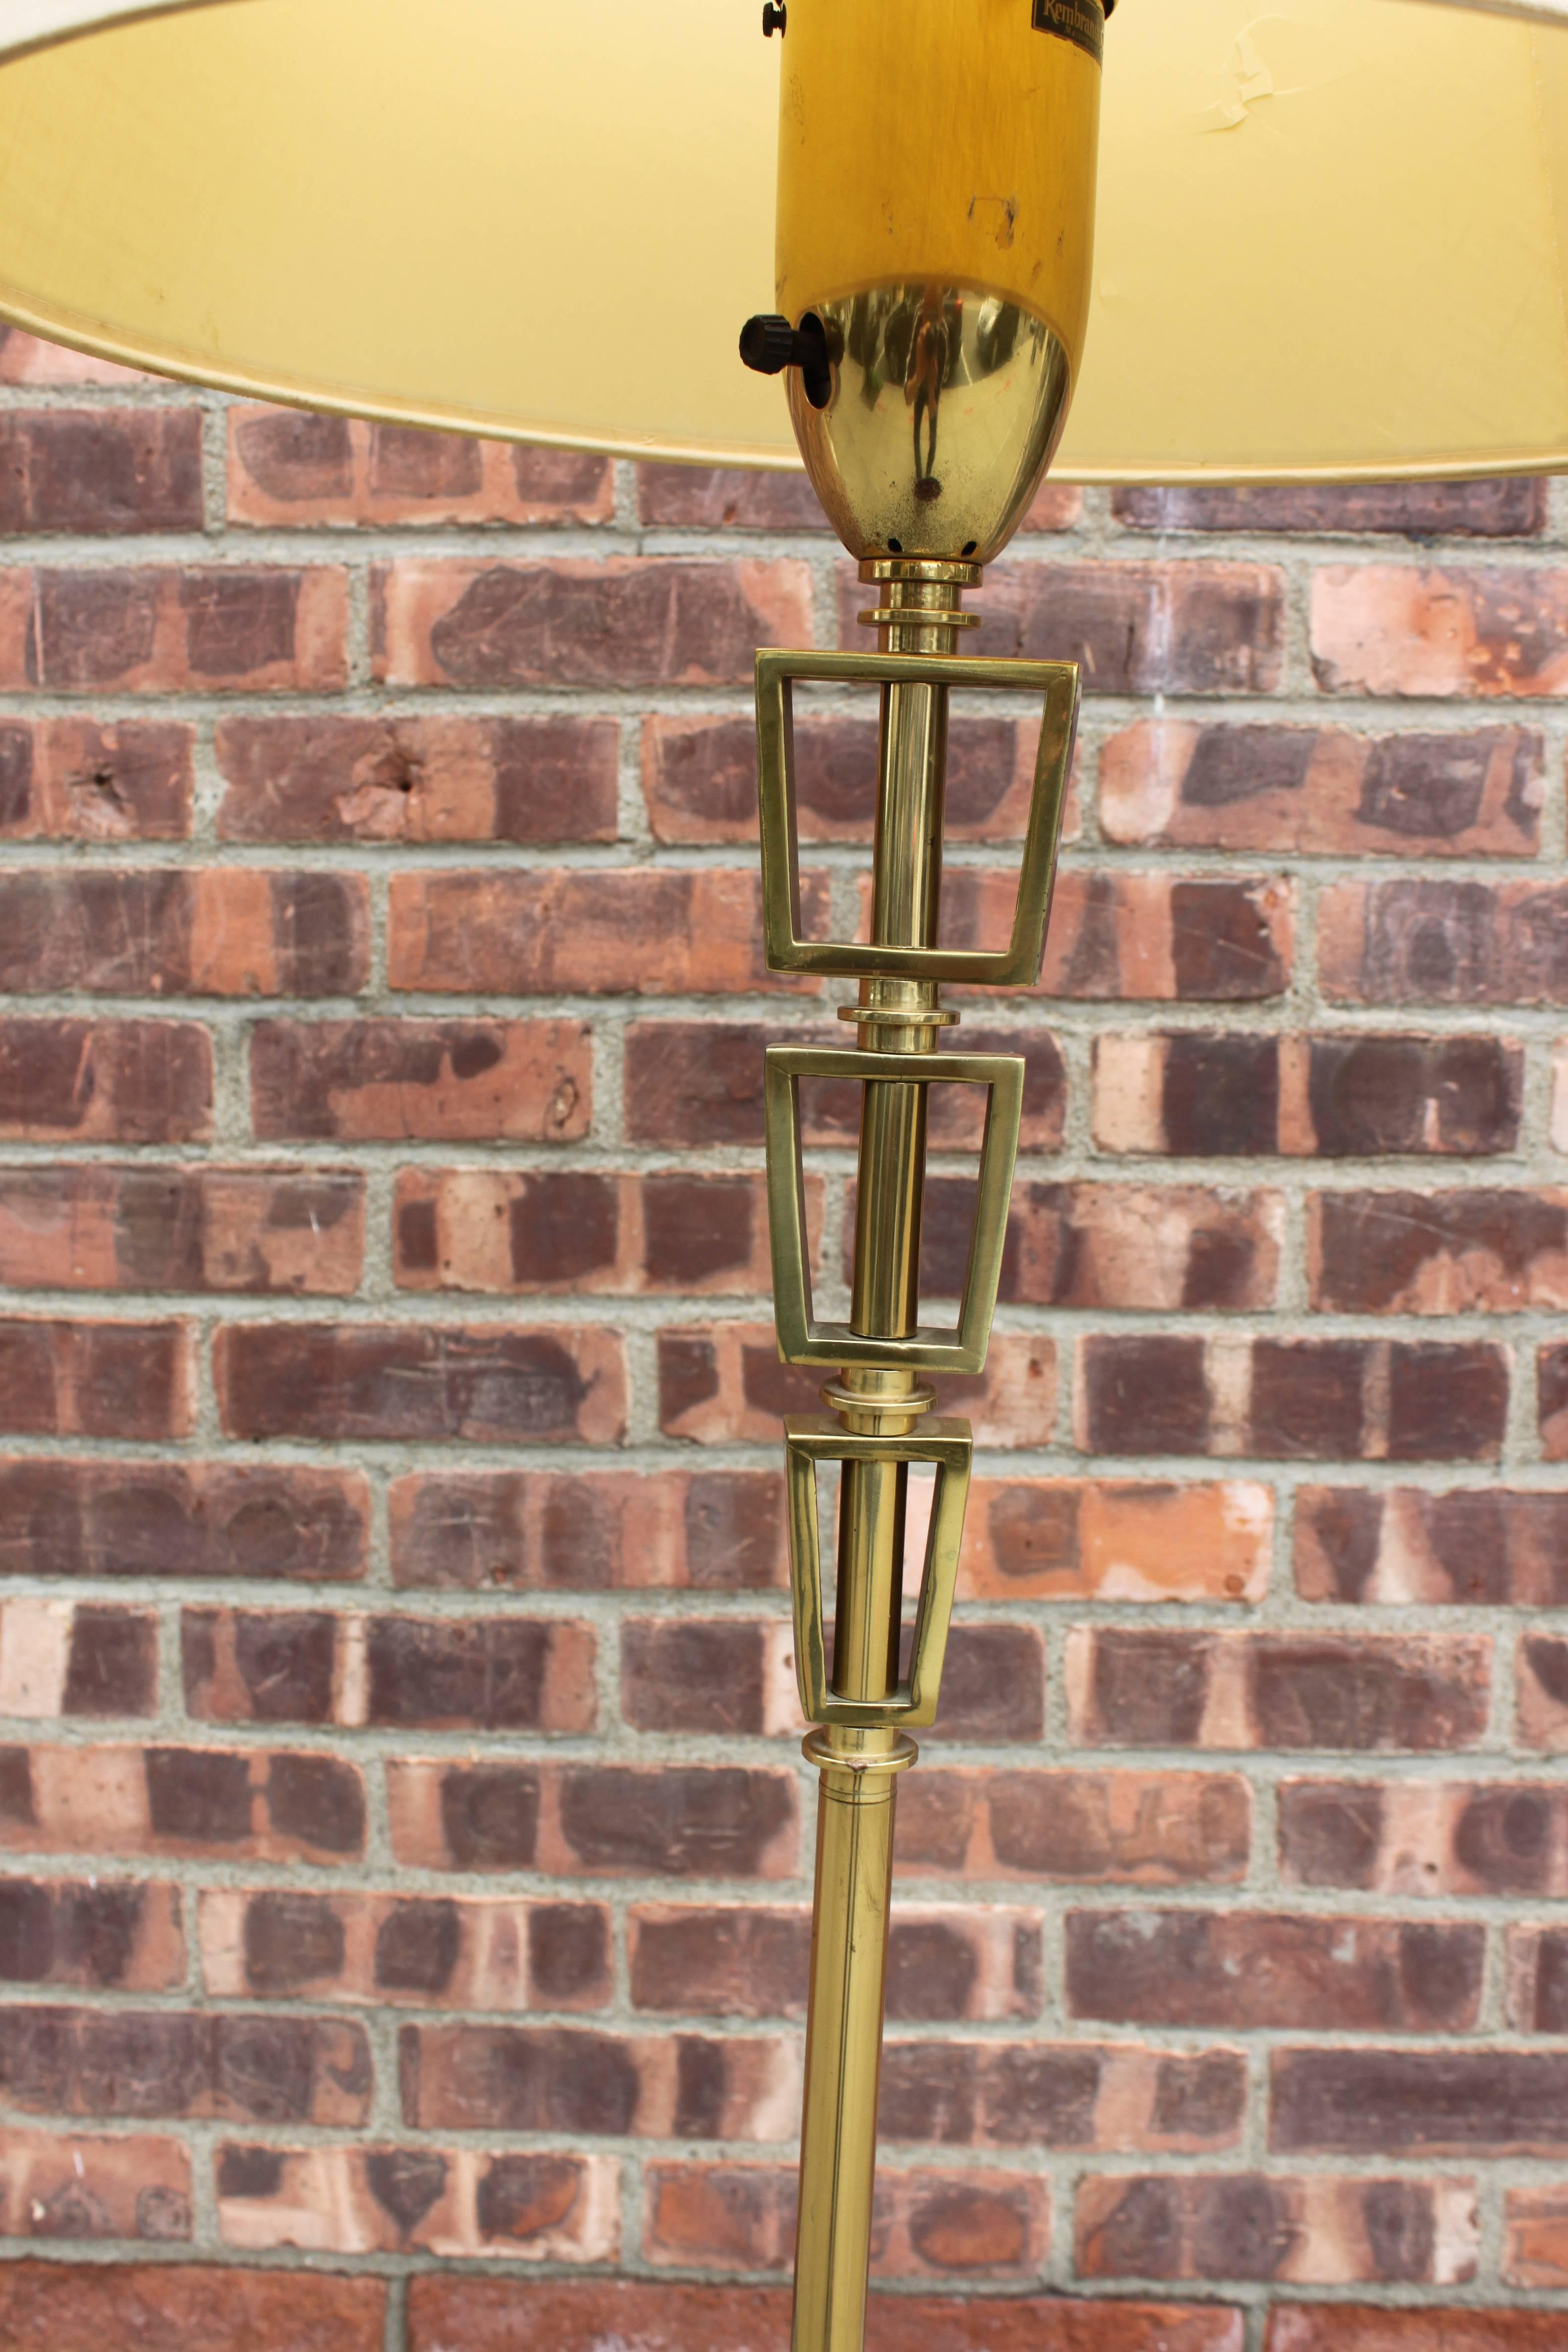 Marked Rembrandt Lamps. Beautiful Mid-Century Modern design in brass. Milk glass interior shade. Height measurement to the top of the interior milk glass shade. Fabric shade has faults.